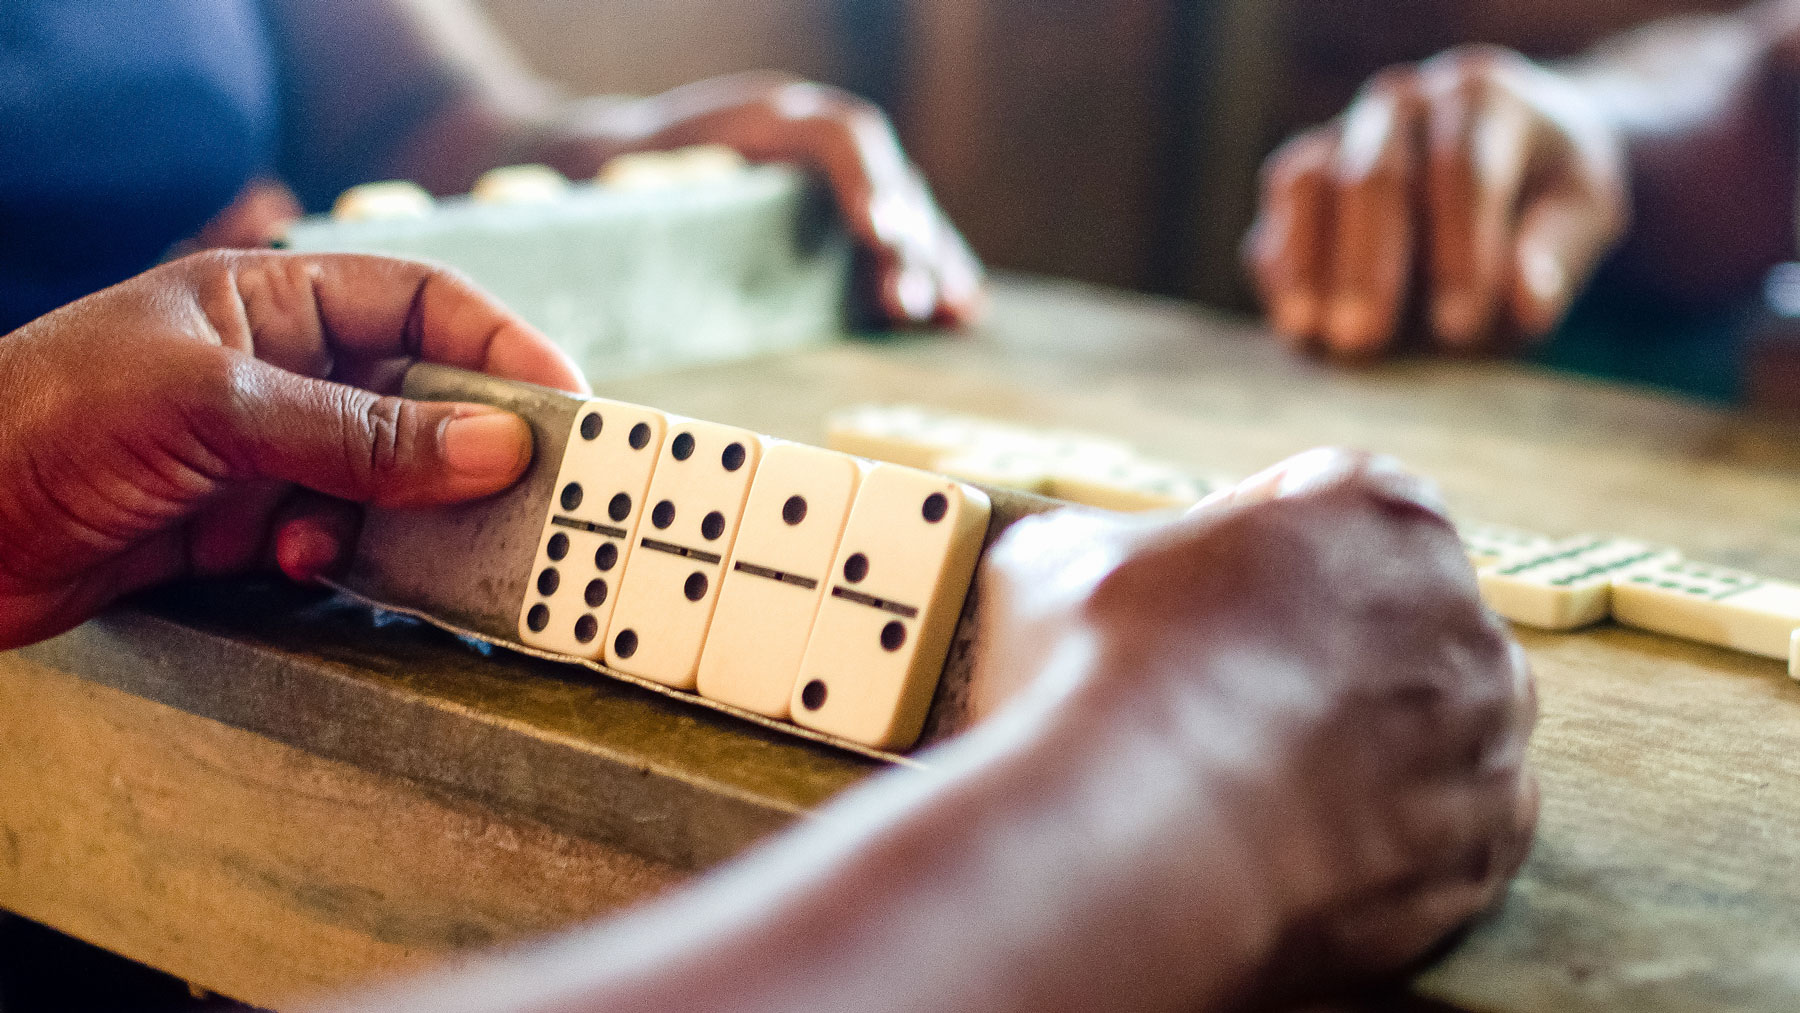 Close-up of hands playing a game of dominoes on a wooden table, illustrating the concept of the domino effect.